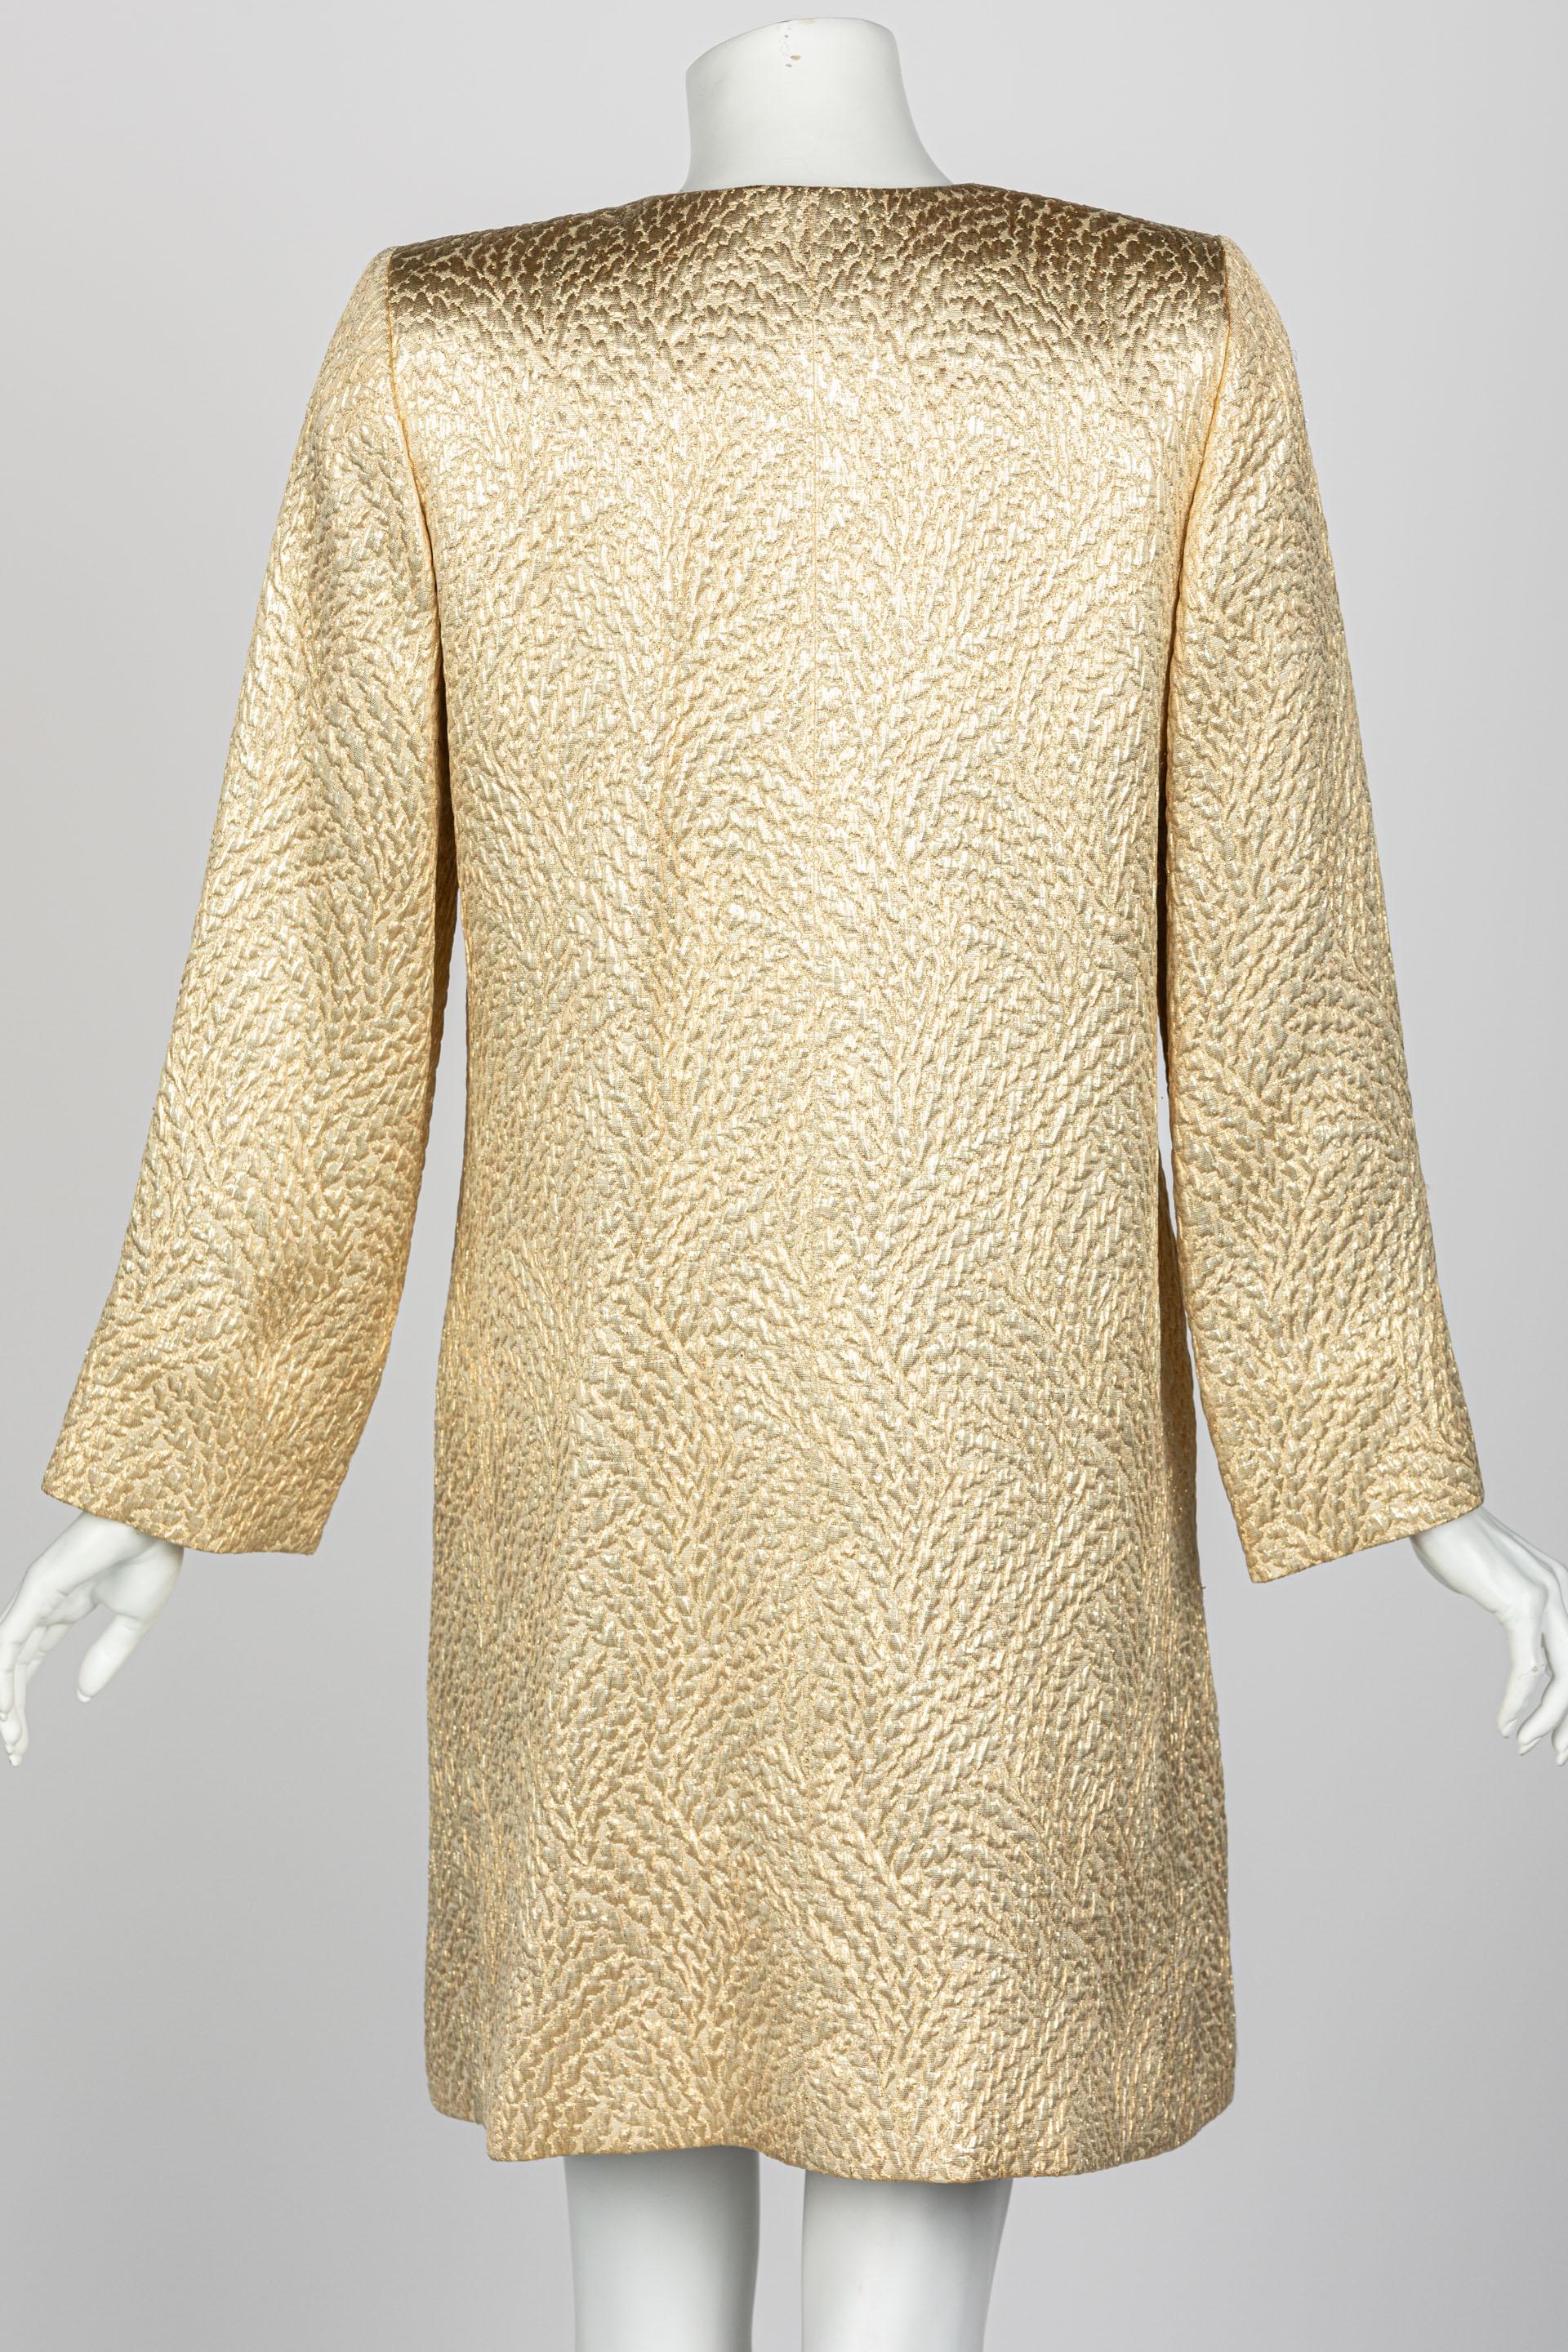 Yves Saint Laurent Gold Evening Coat w/ Jeweled Buttons YSL, 1990s For Sale 1